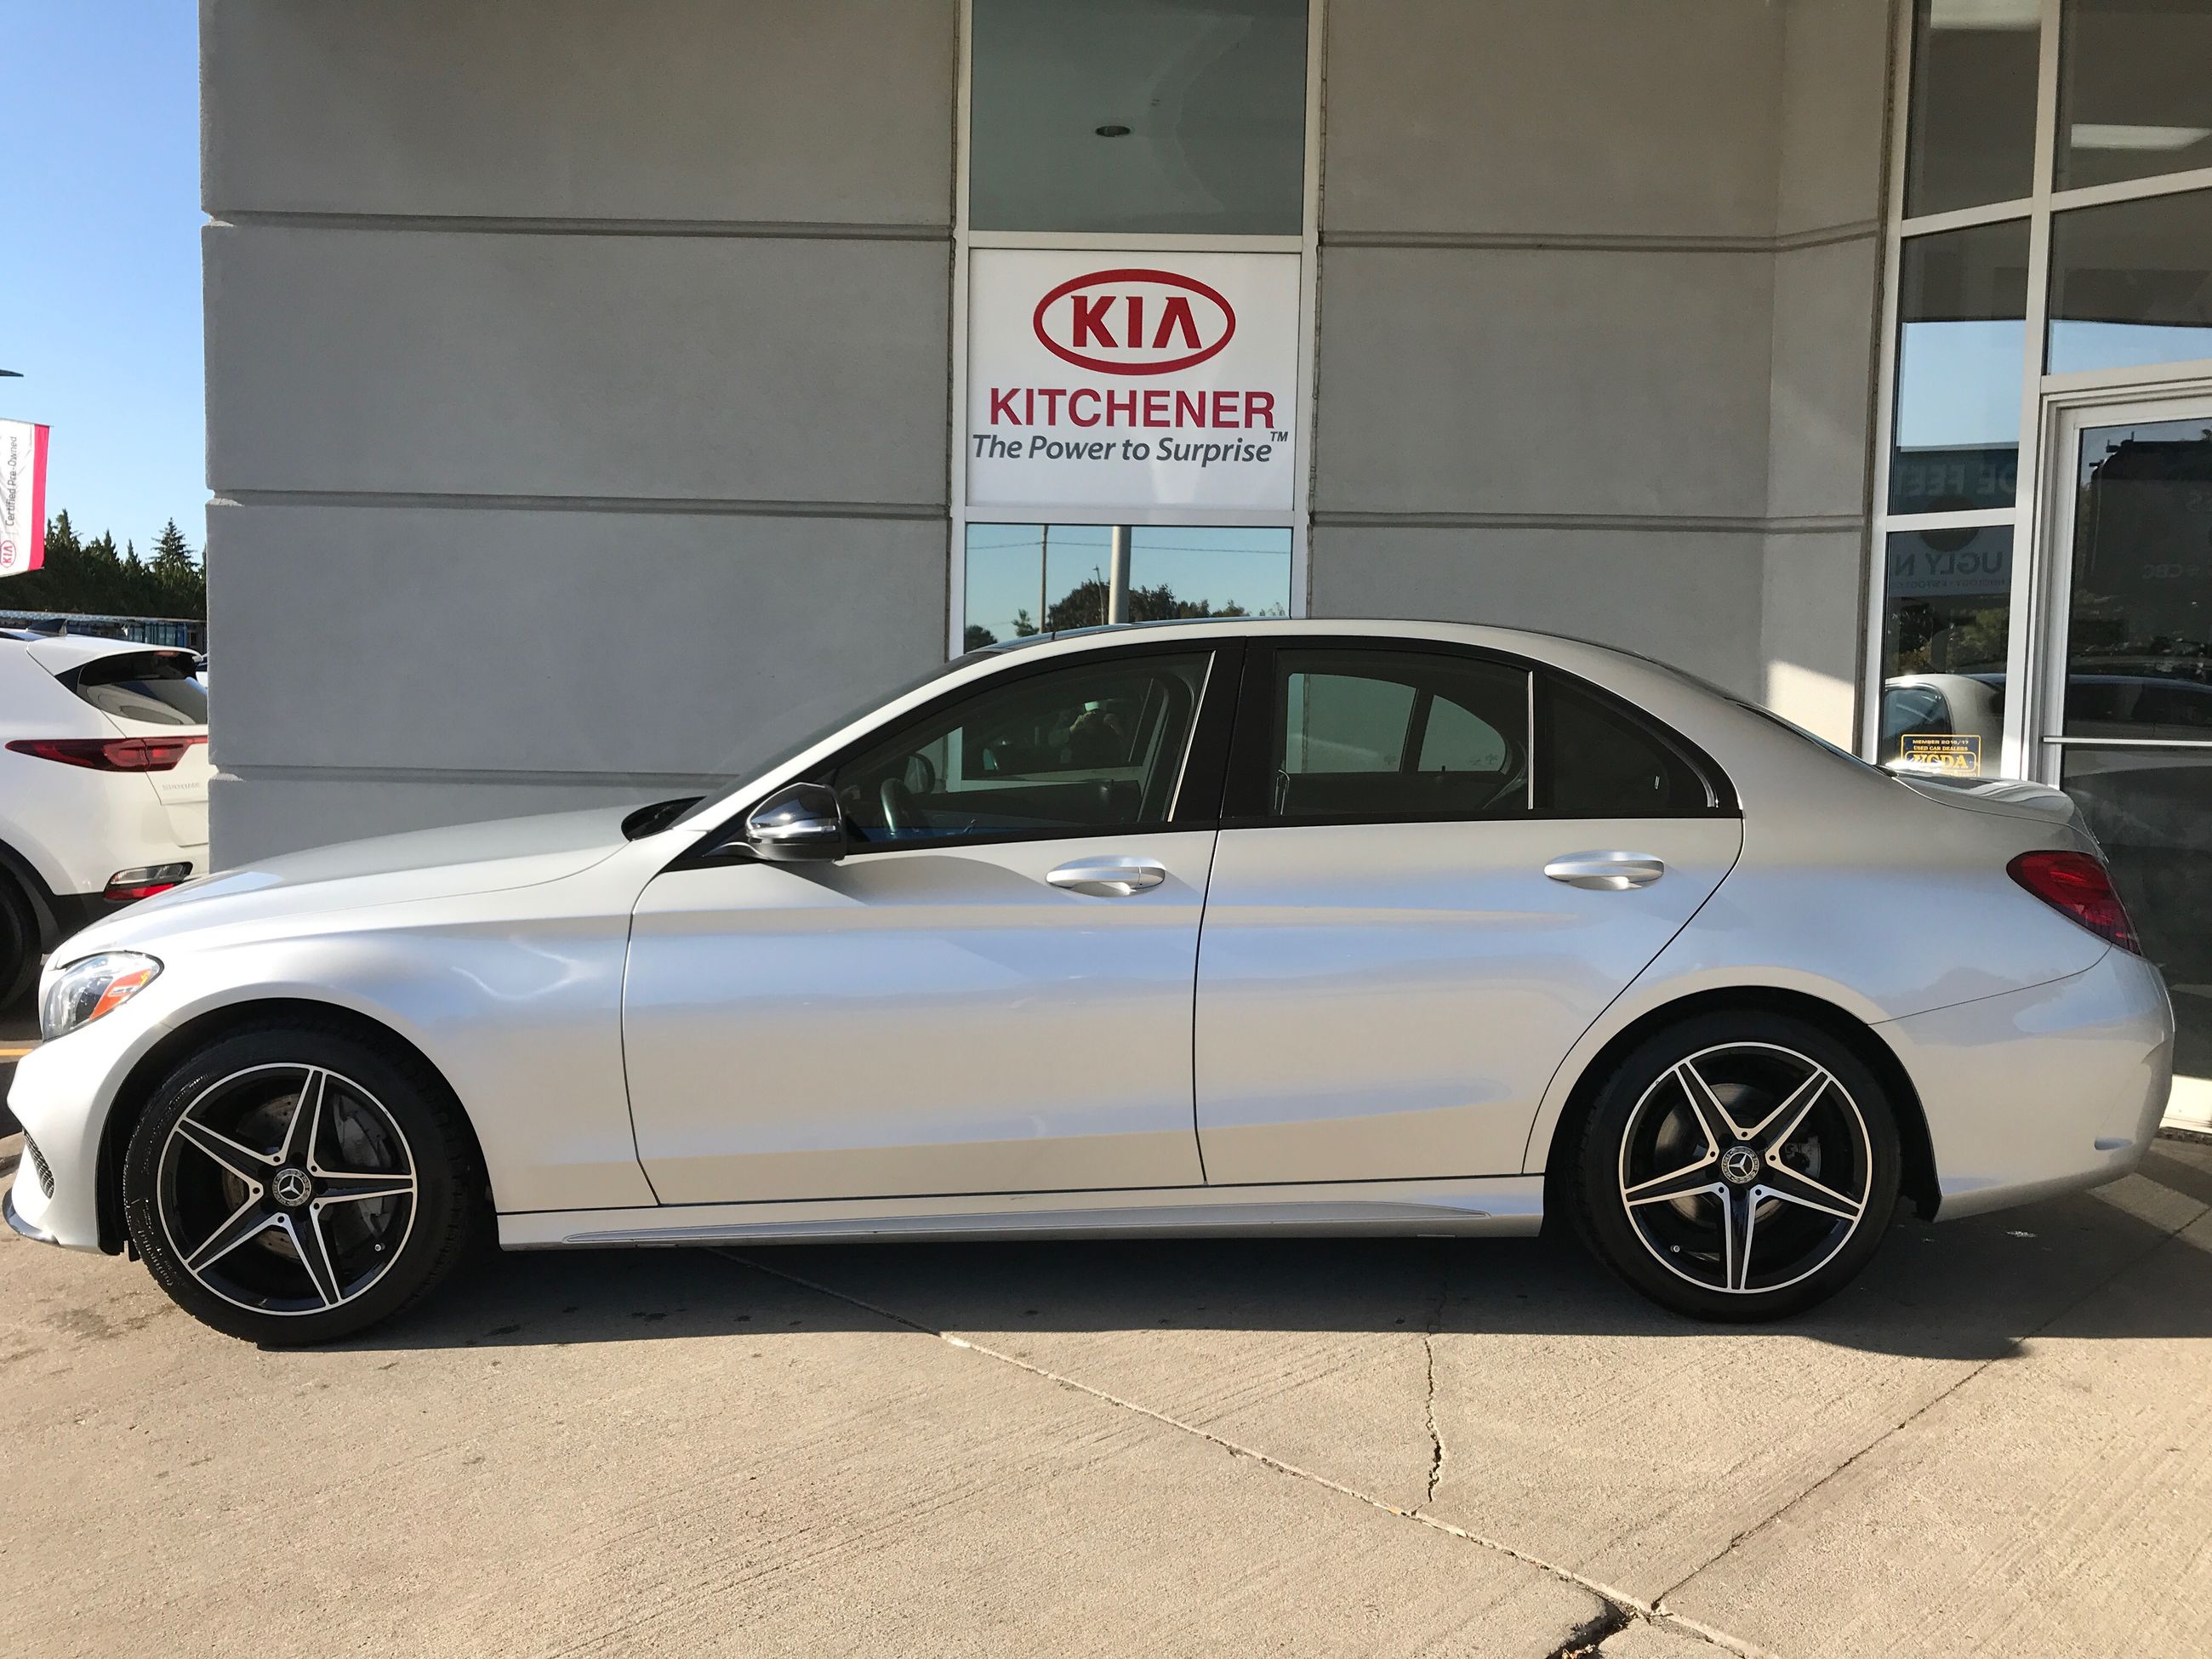 Used 2017 Mercedes-Benz C300 4MATIC, WINTER TIRE PACKAGE INCLUDED!!! for Sale - $34899.0 ...